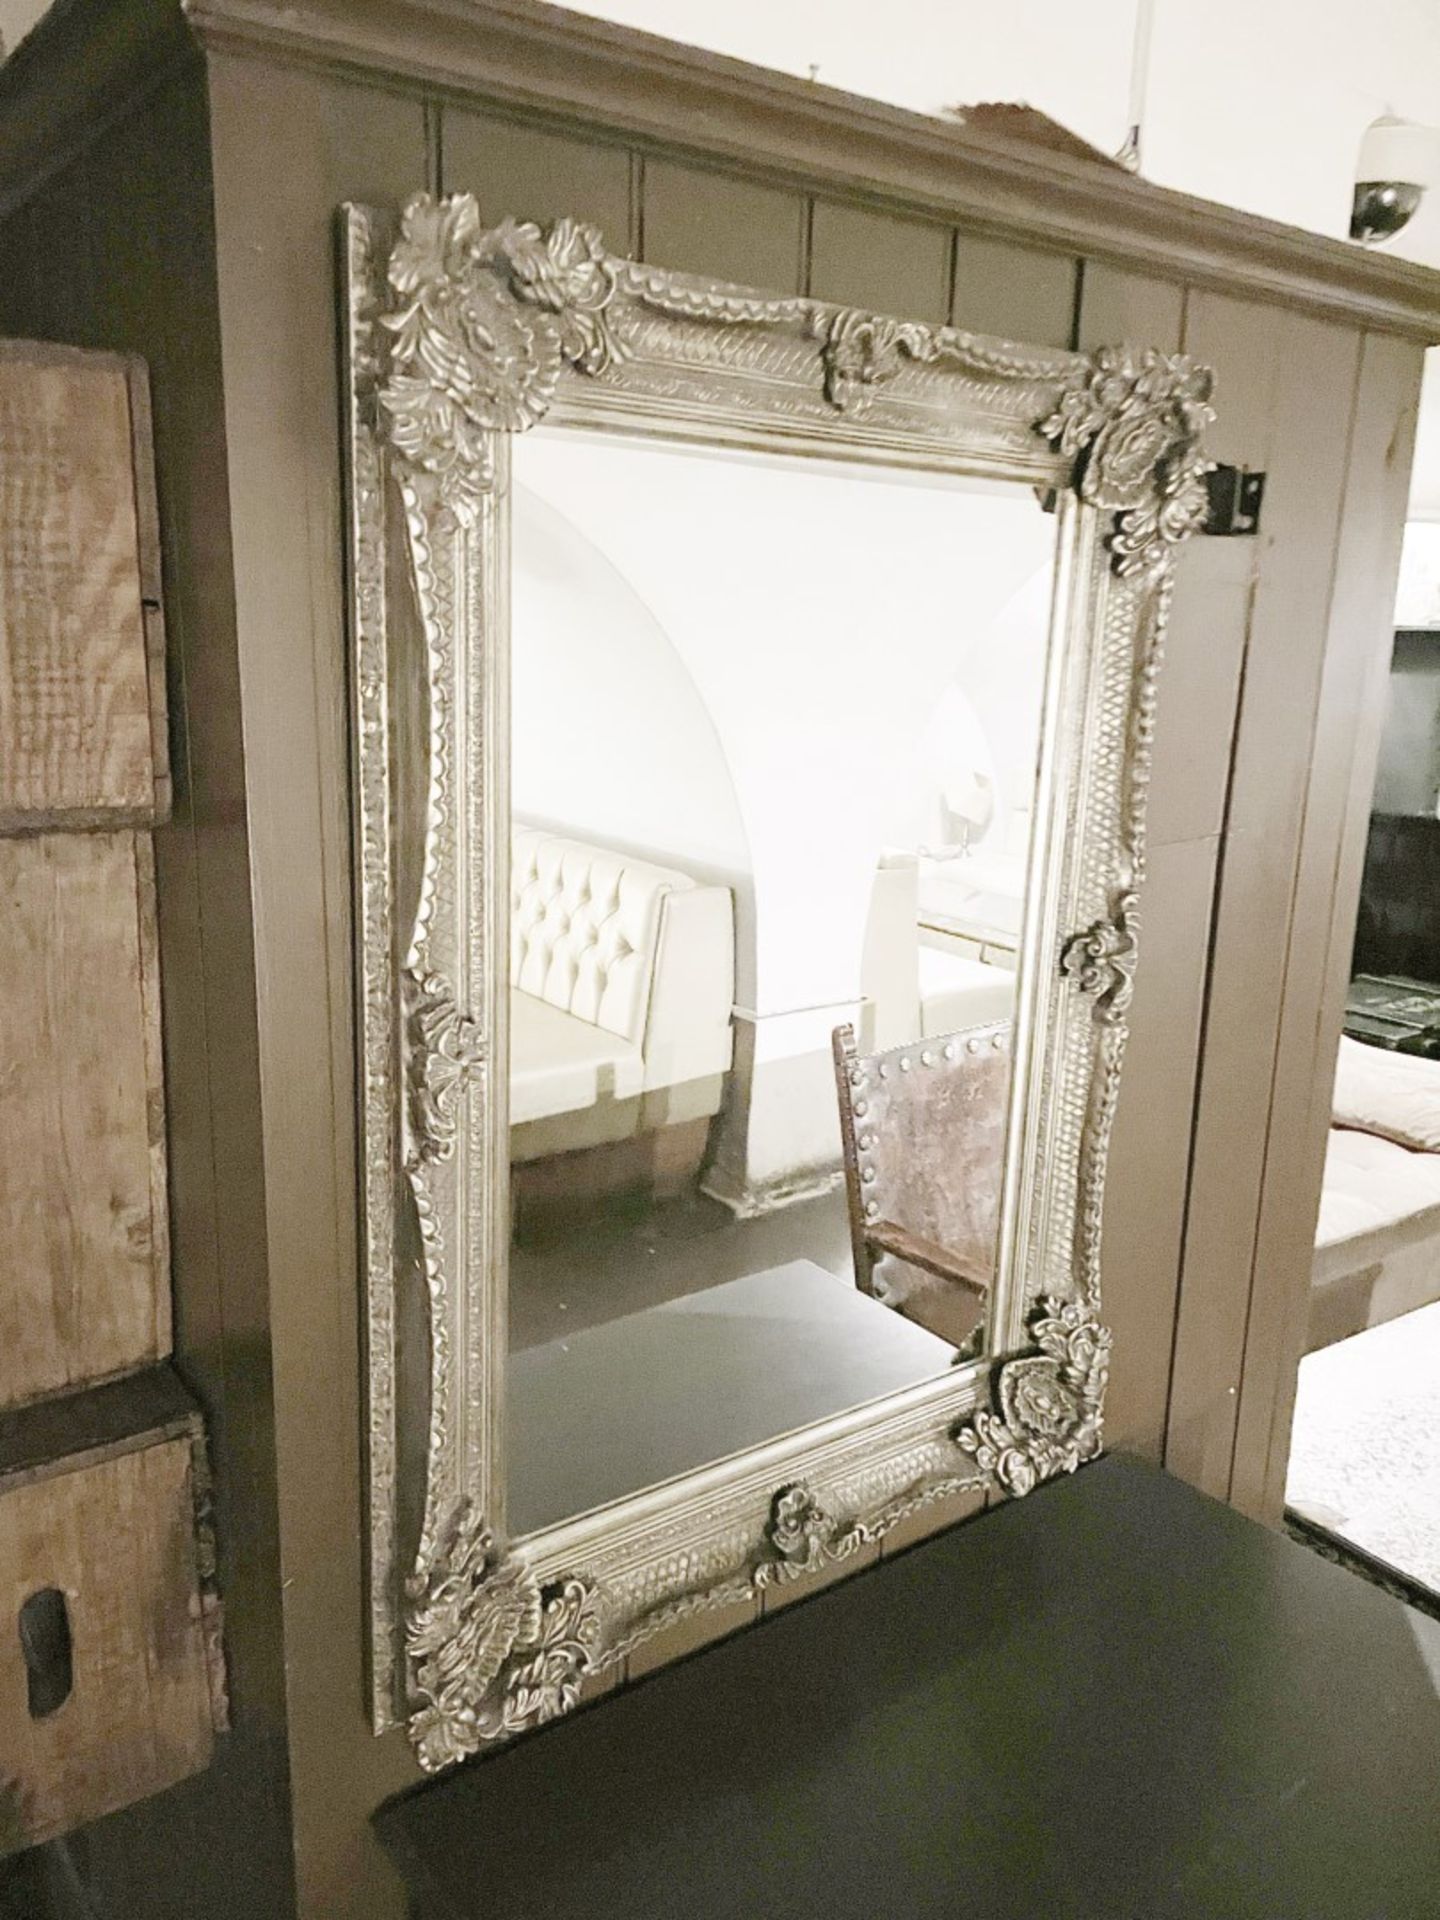 1 x Large Ornate Antique-style Painted Wall Mirror with Distressed Wooden Cabinet in Grey - Image 4 of 9